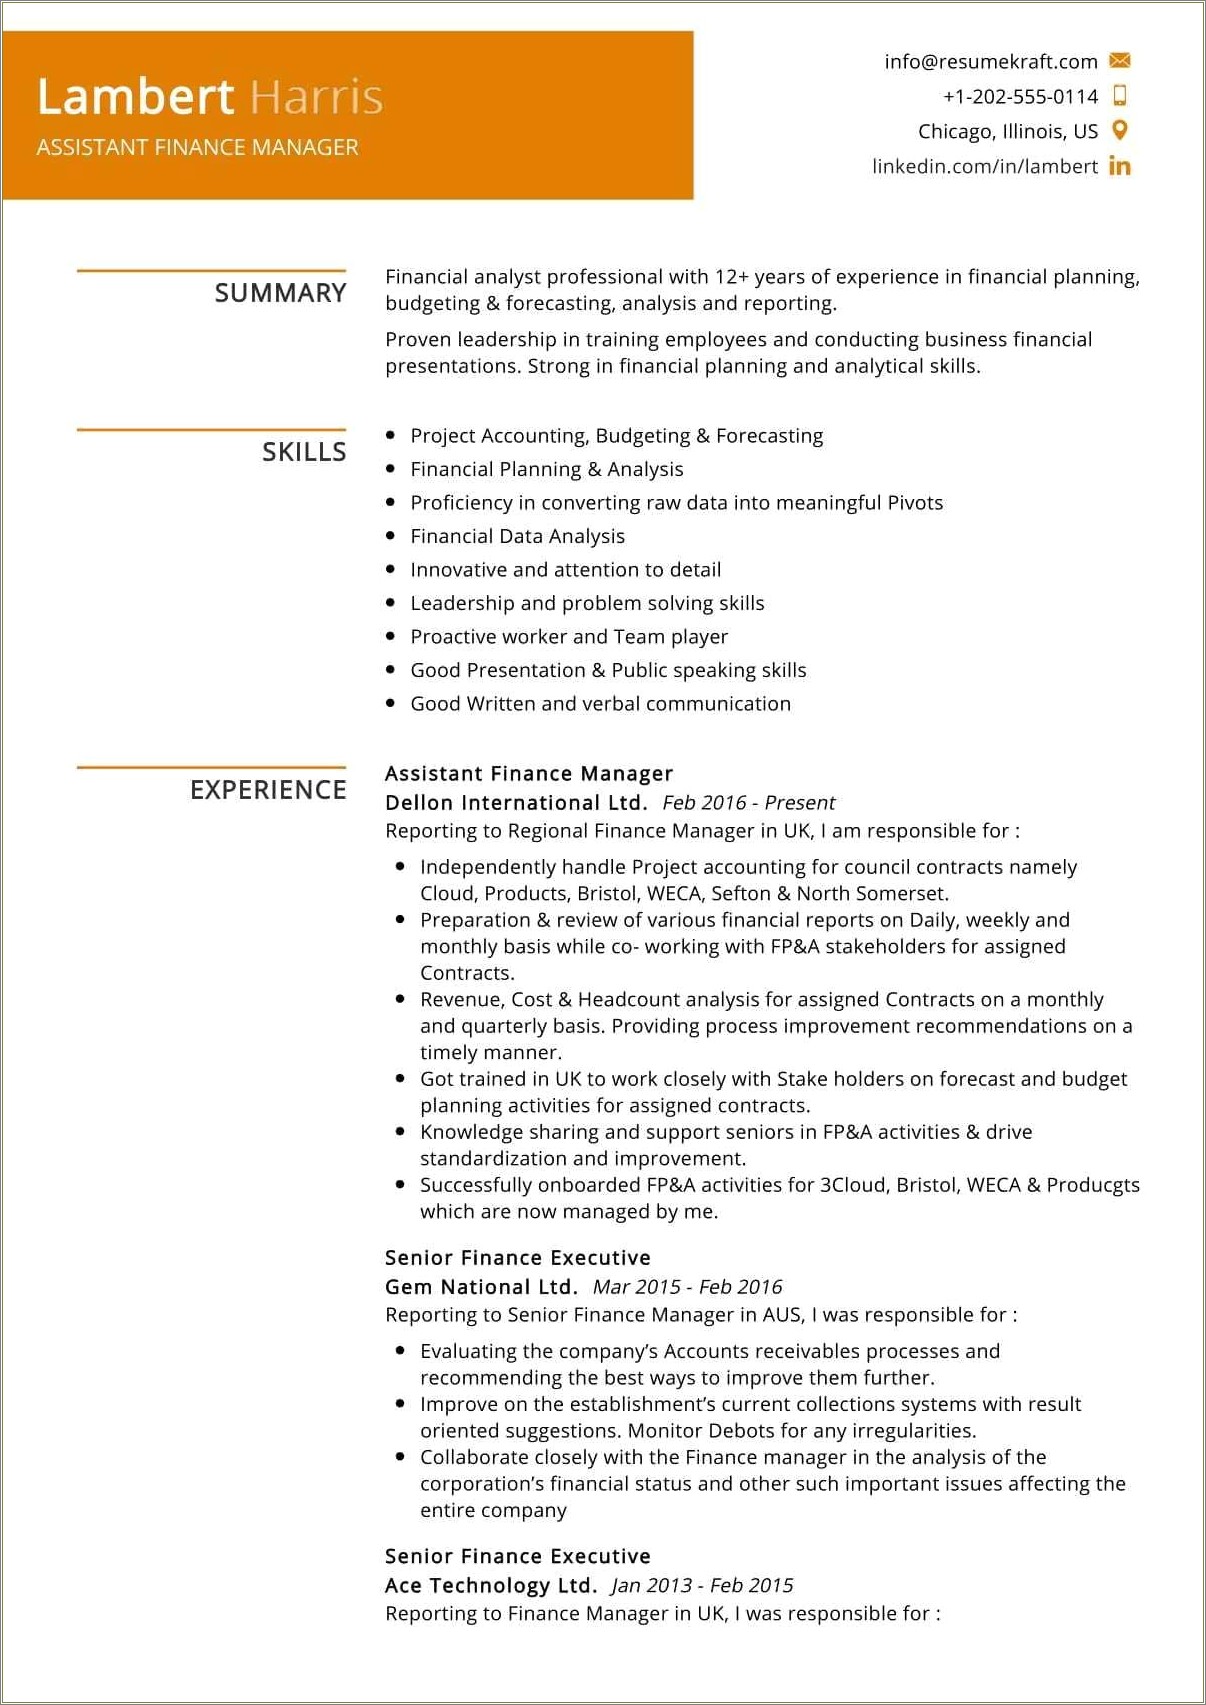 Sample Resume For Experienced Finance Executive